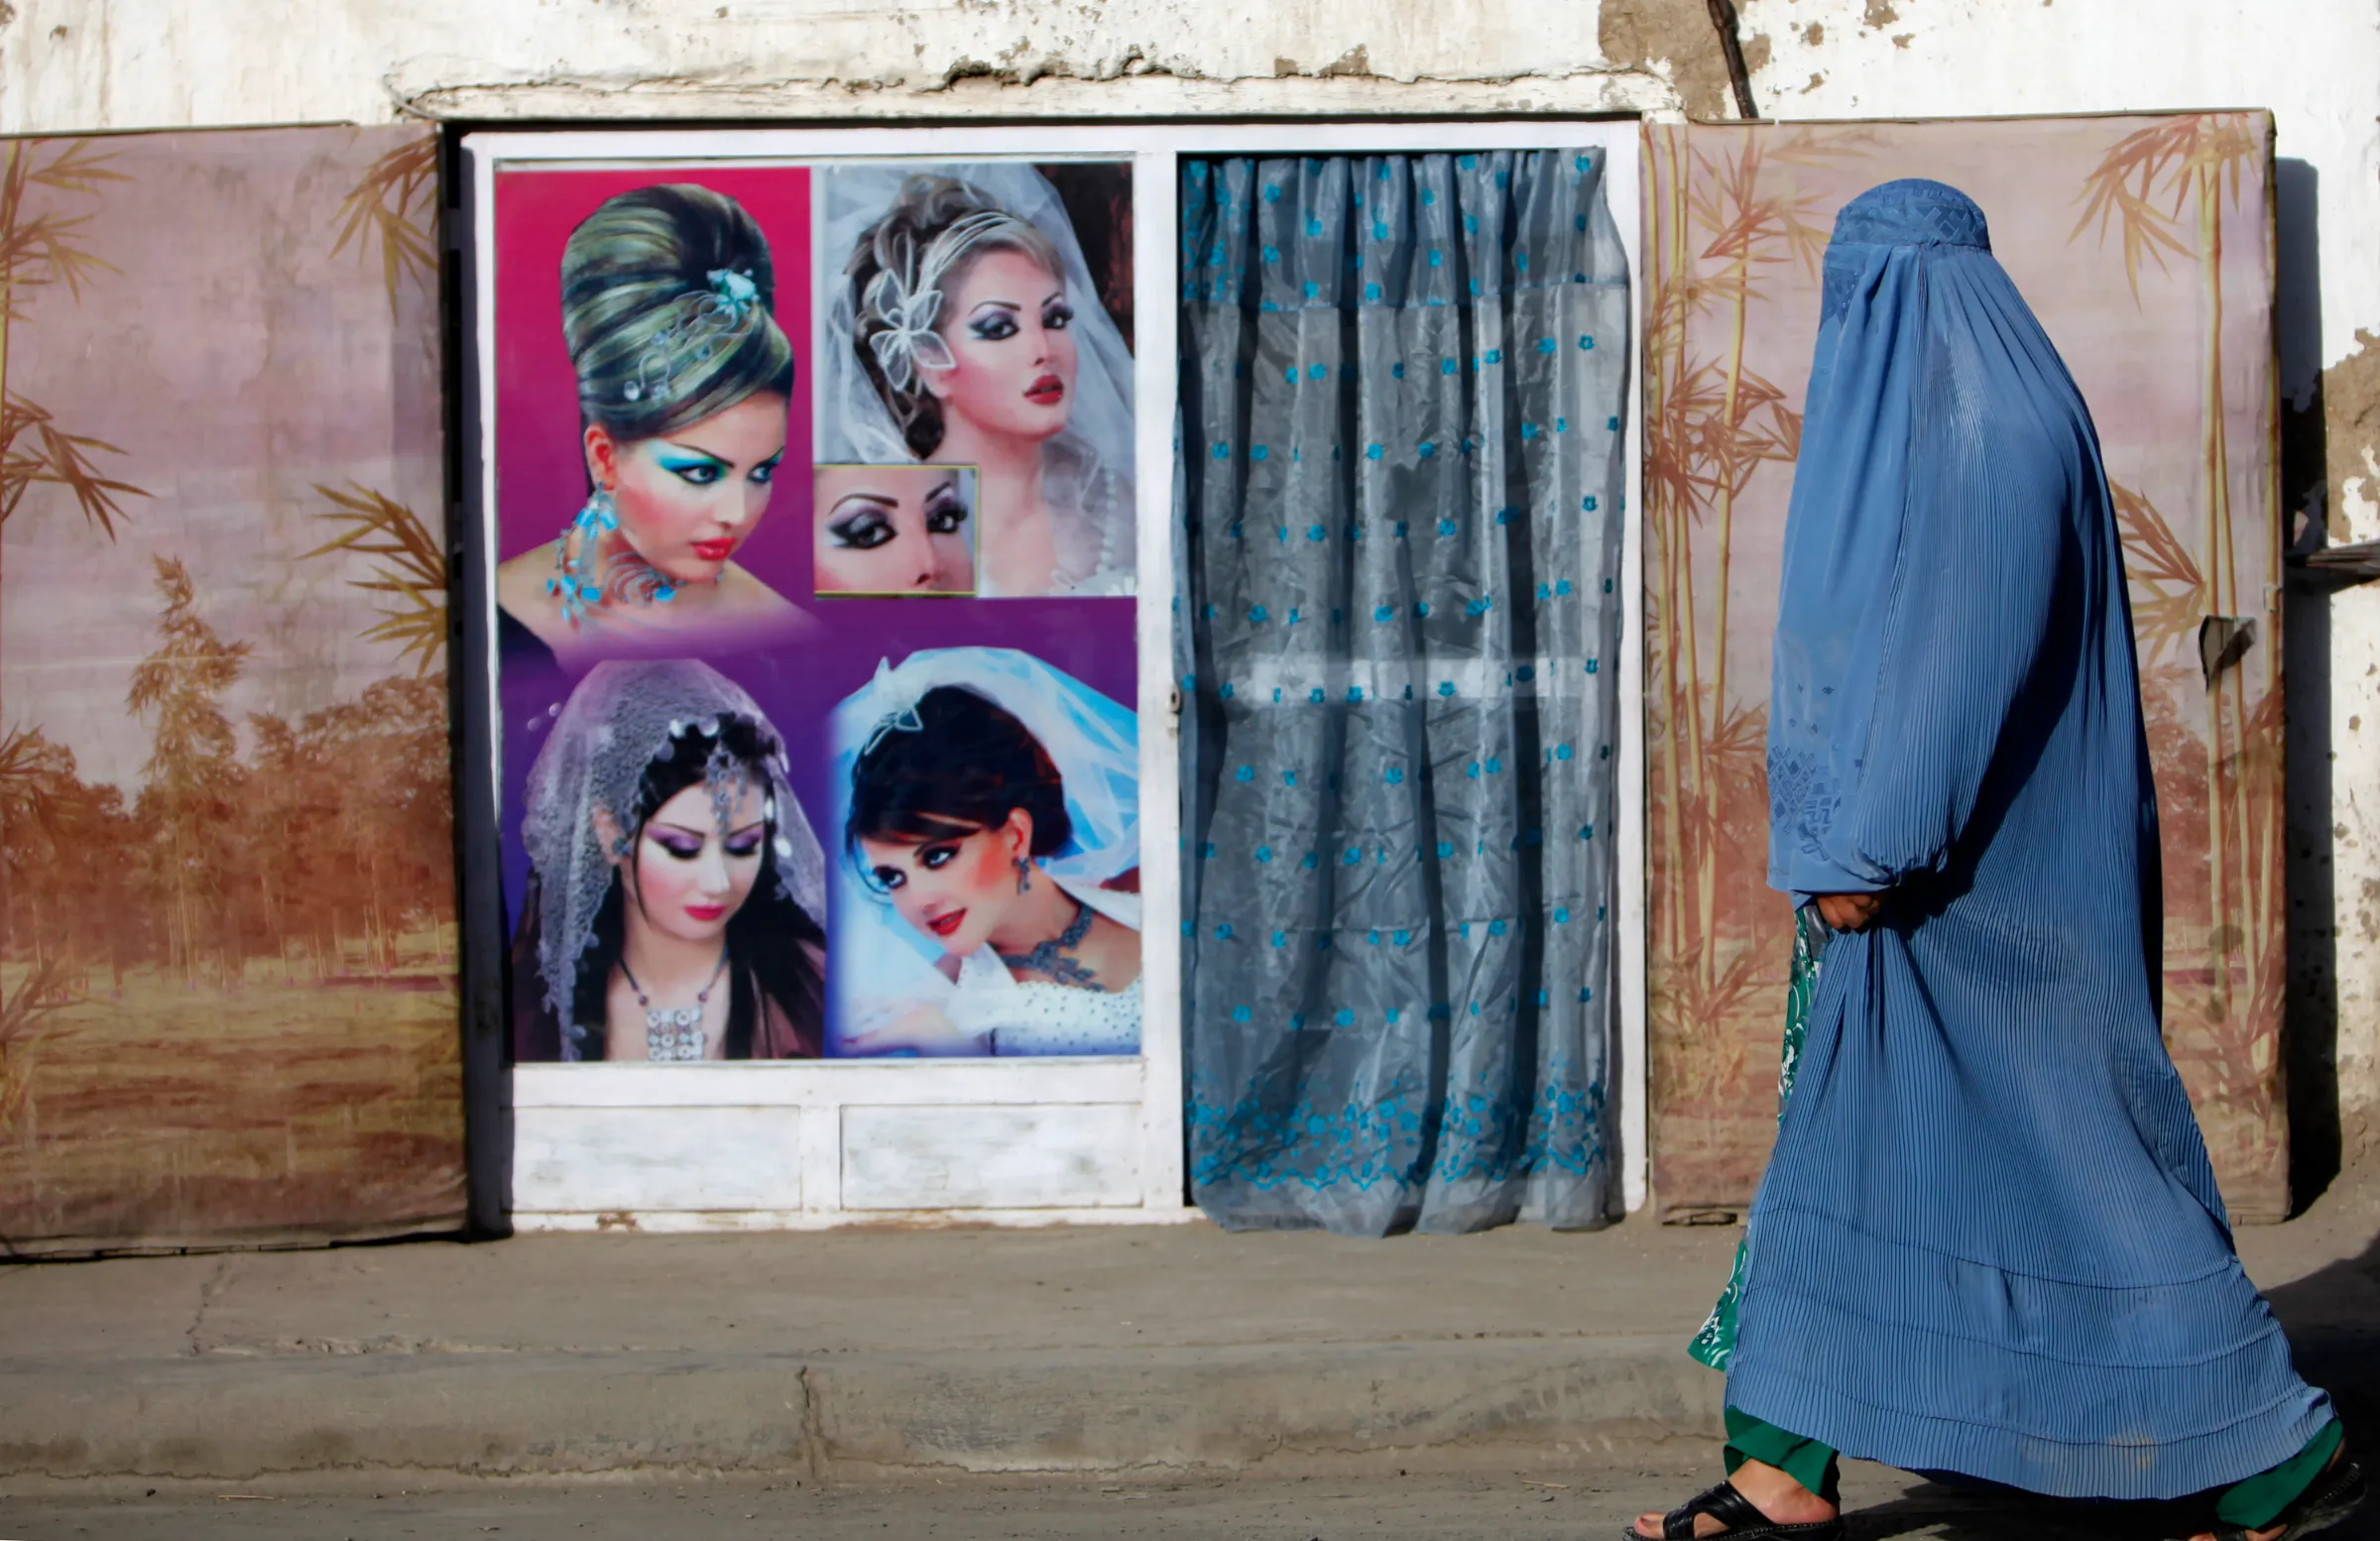 An Afghan woman in a burqa walks past a beauty salon in Kabul September 11, 2013. REUTERS/Mohammad Ismail